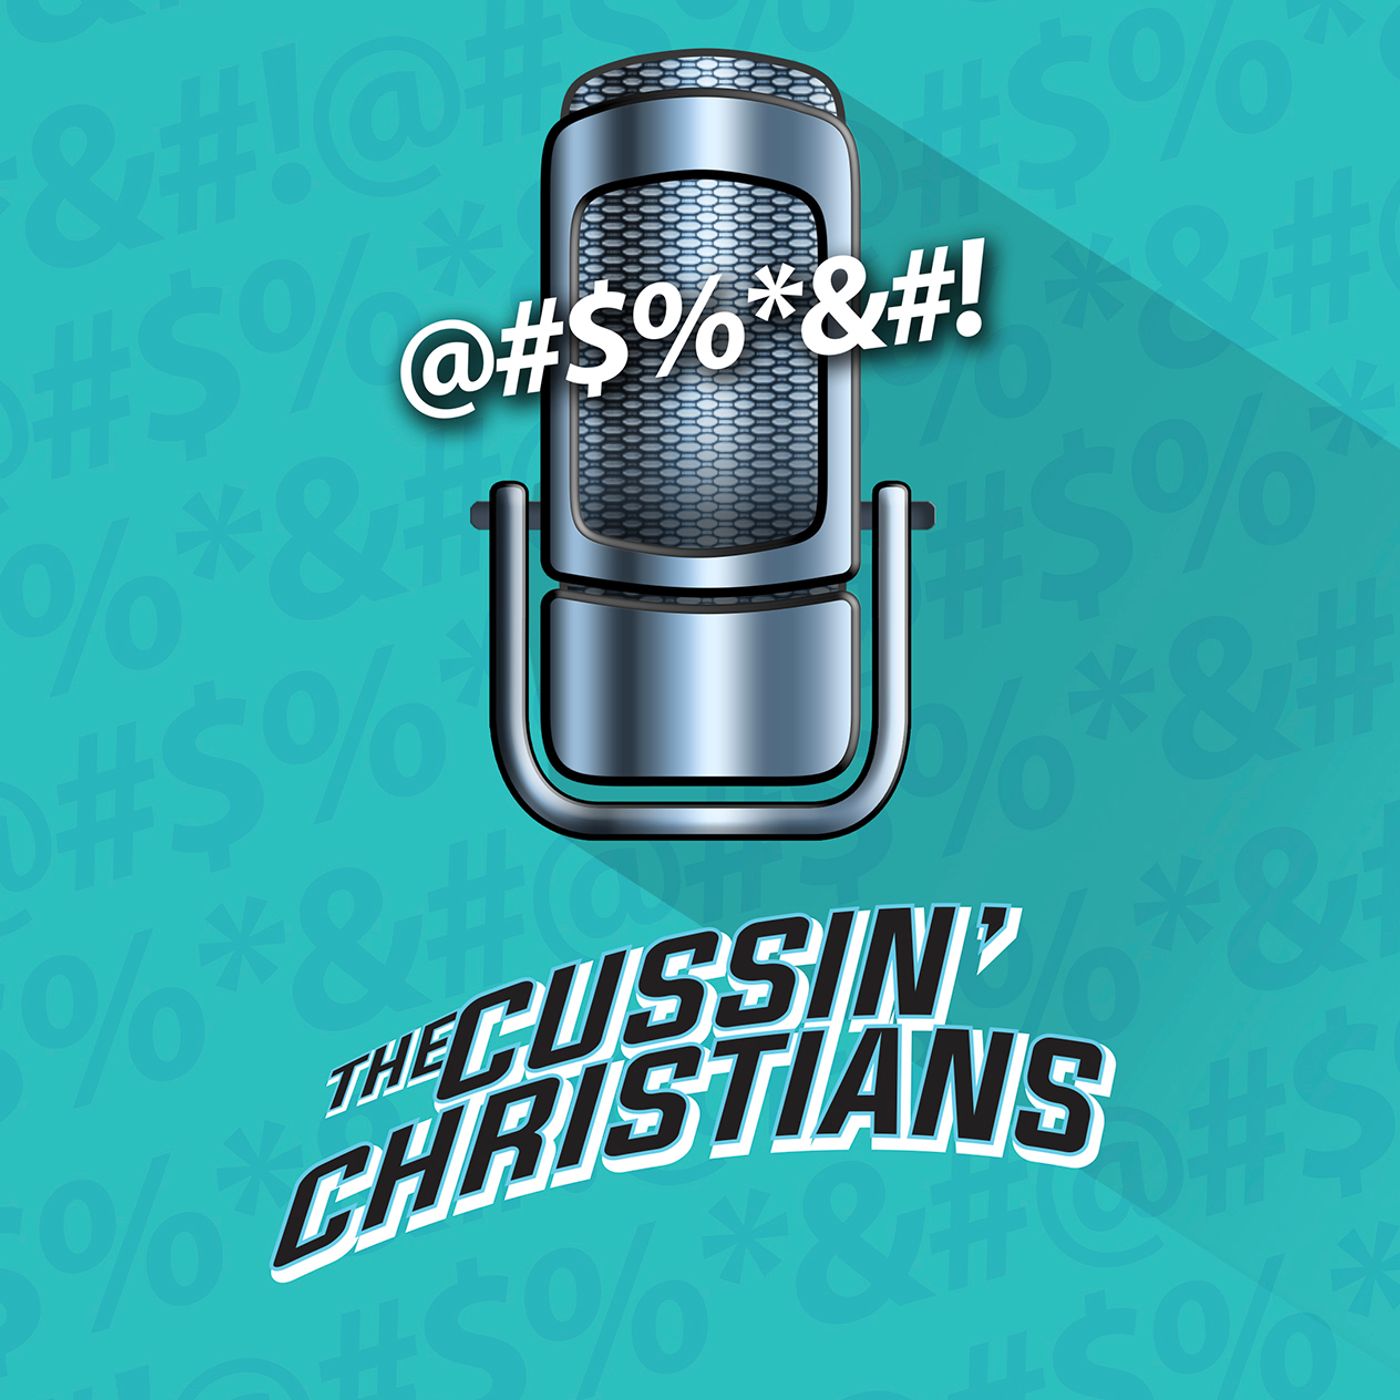 Cussin' Christians Ep. 119 - Comfortably Numb